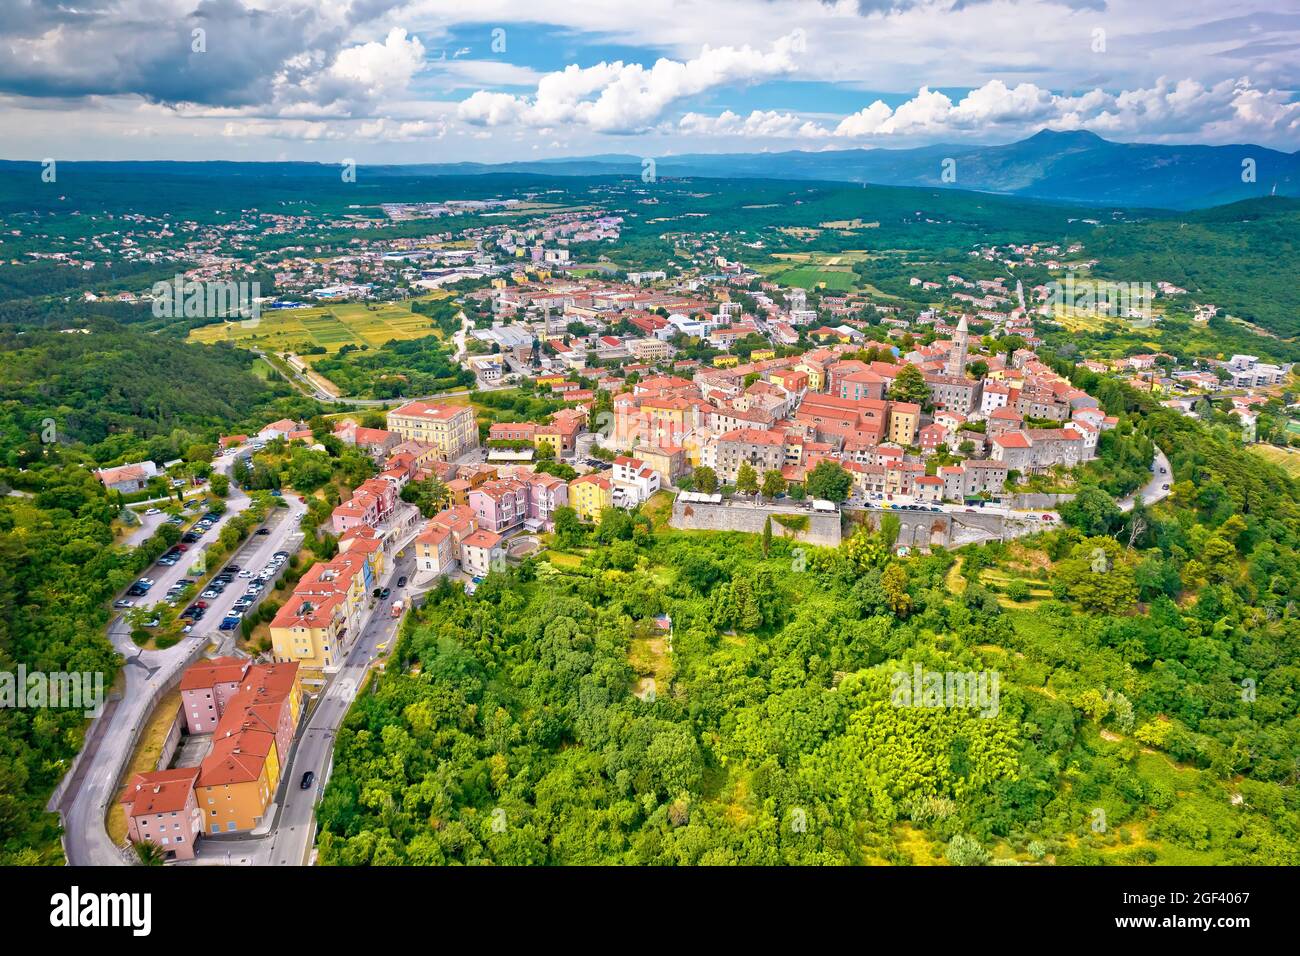 Historic town of Labin on picturesque hill aerial view, Istria region of Croatia Stock Photo